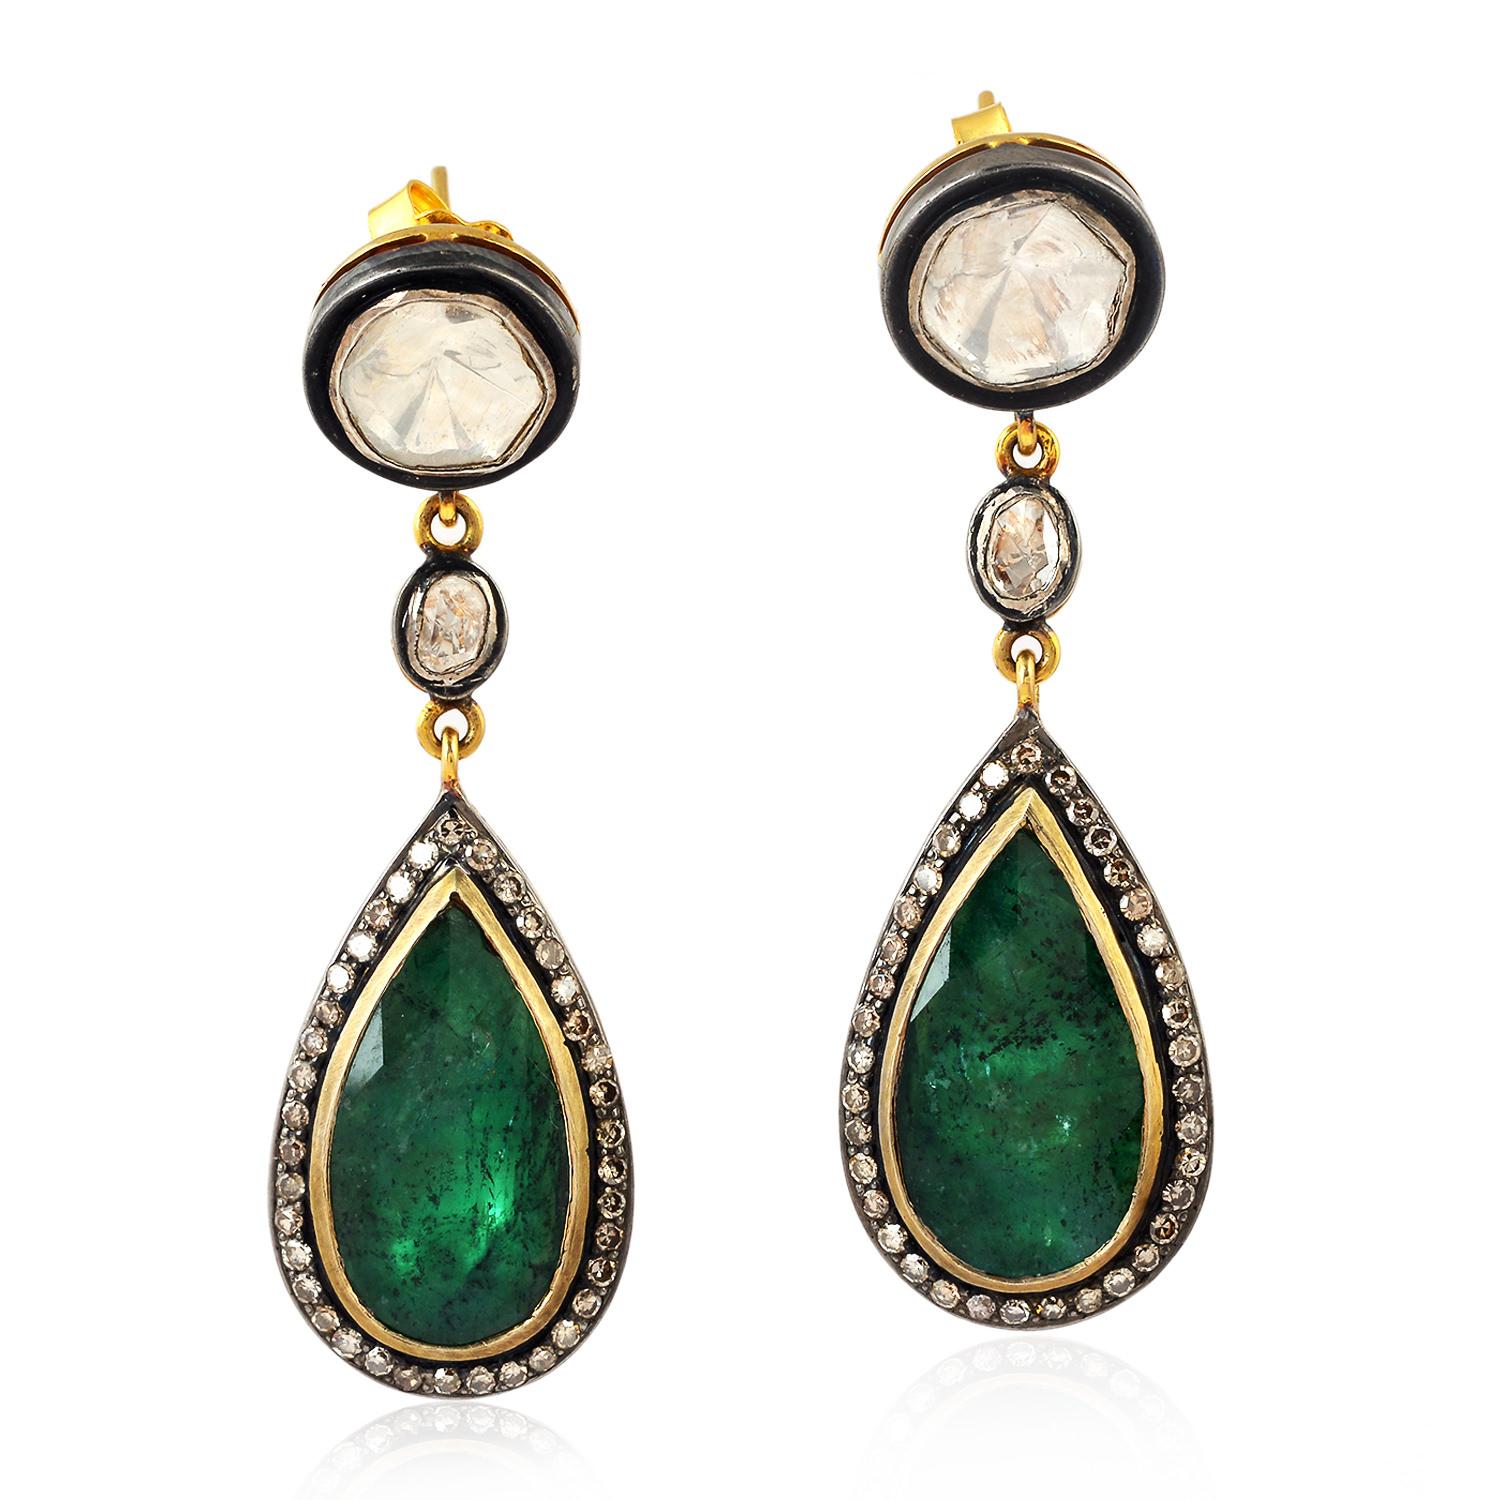 Early Victorian Pear Shaped Emerald Earring With Diamonds Made In 14k Gold & Silver For Sale